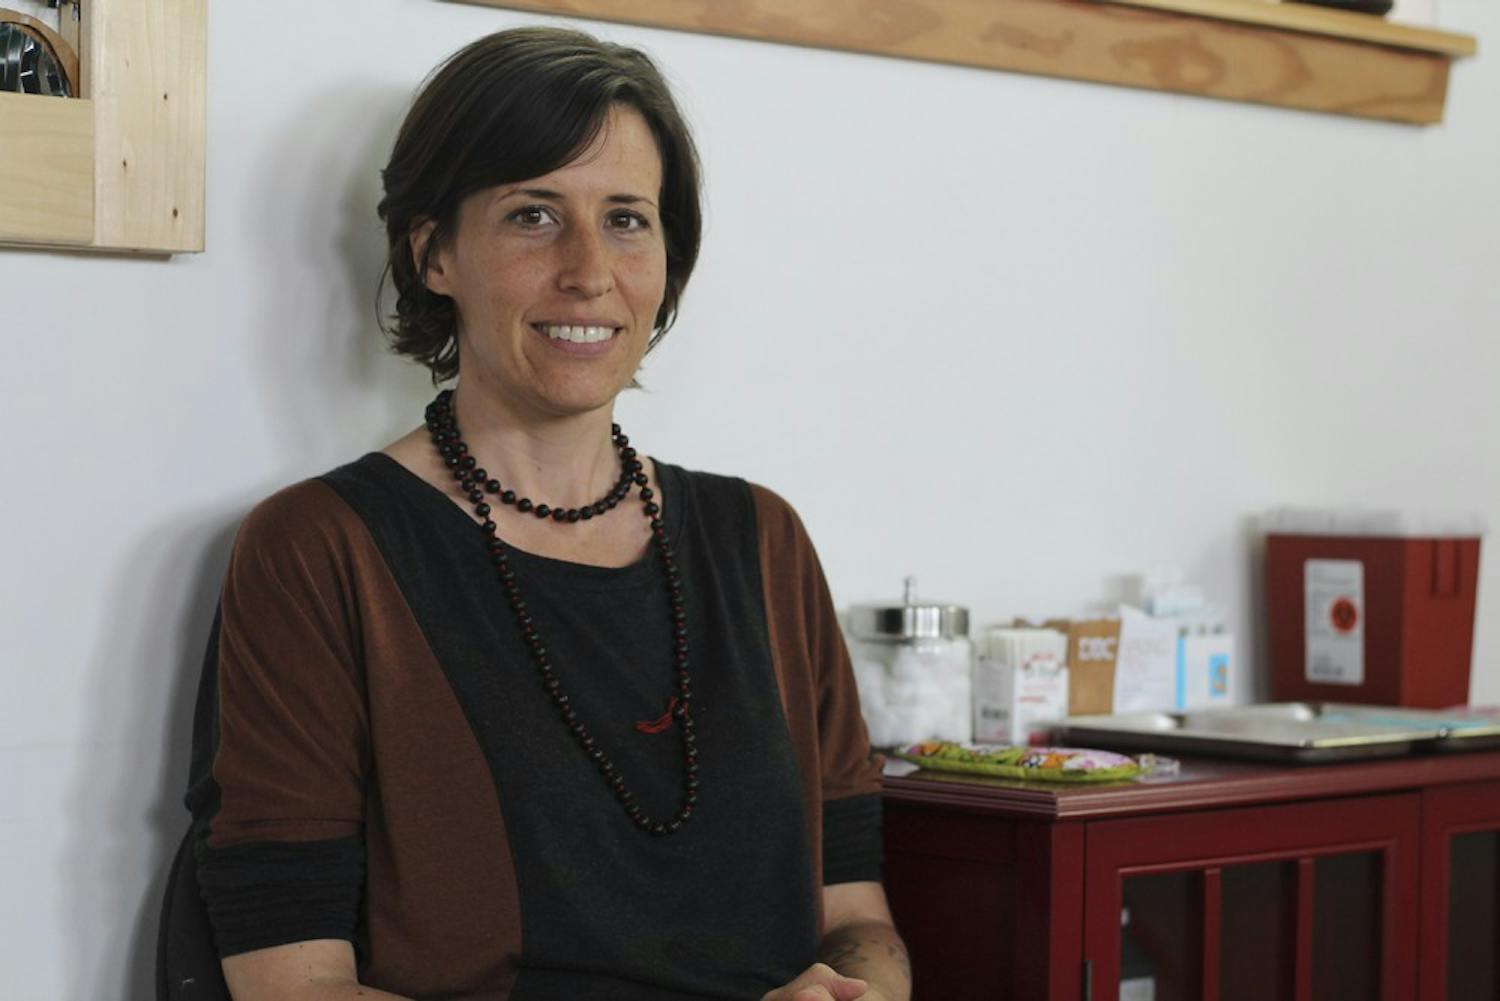 Kim Calandra, owner of Carrboro Community Acupuncture, sits in her office April 22, 2015. Calandra opened it in late 2014, and says she has strived to make the community a big part of the space.